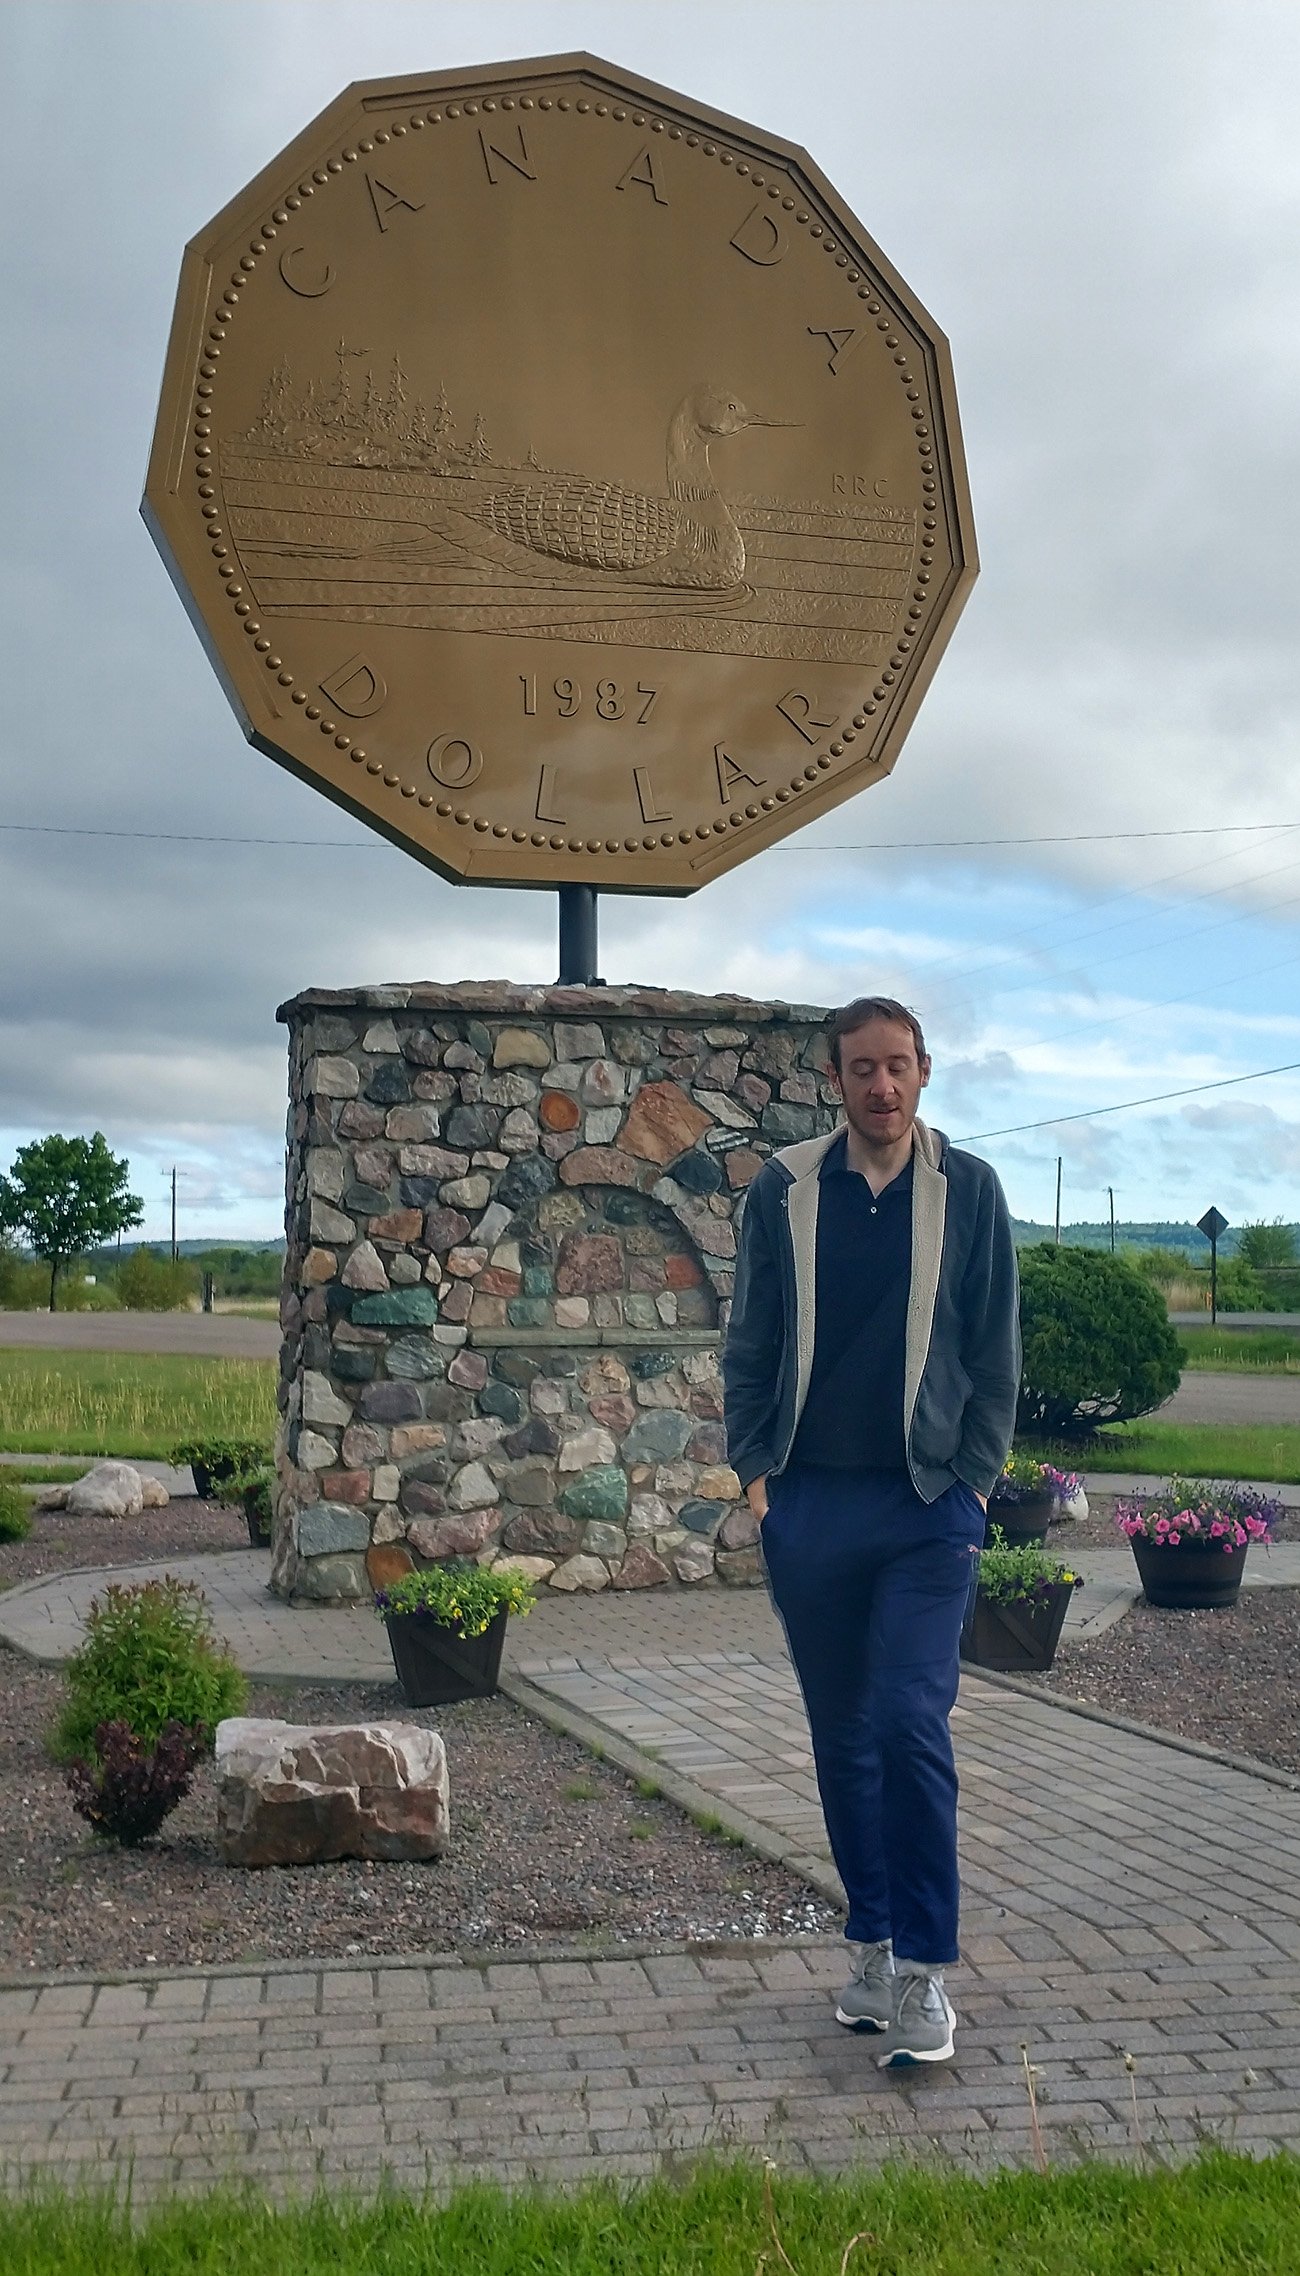 Right outside Sault Ste-Marie you will pass by the small town of Echo Bay, home to the World's Biggest Loonie